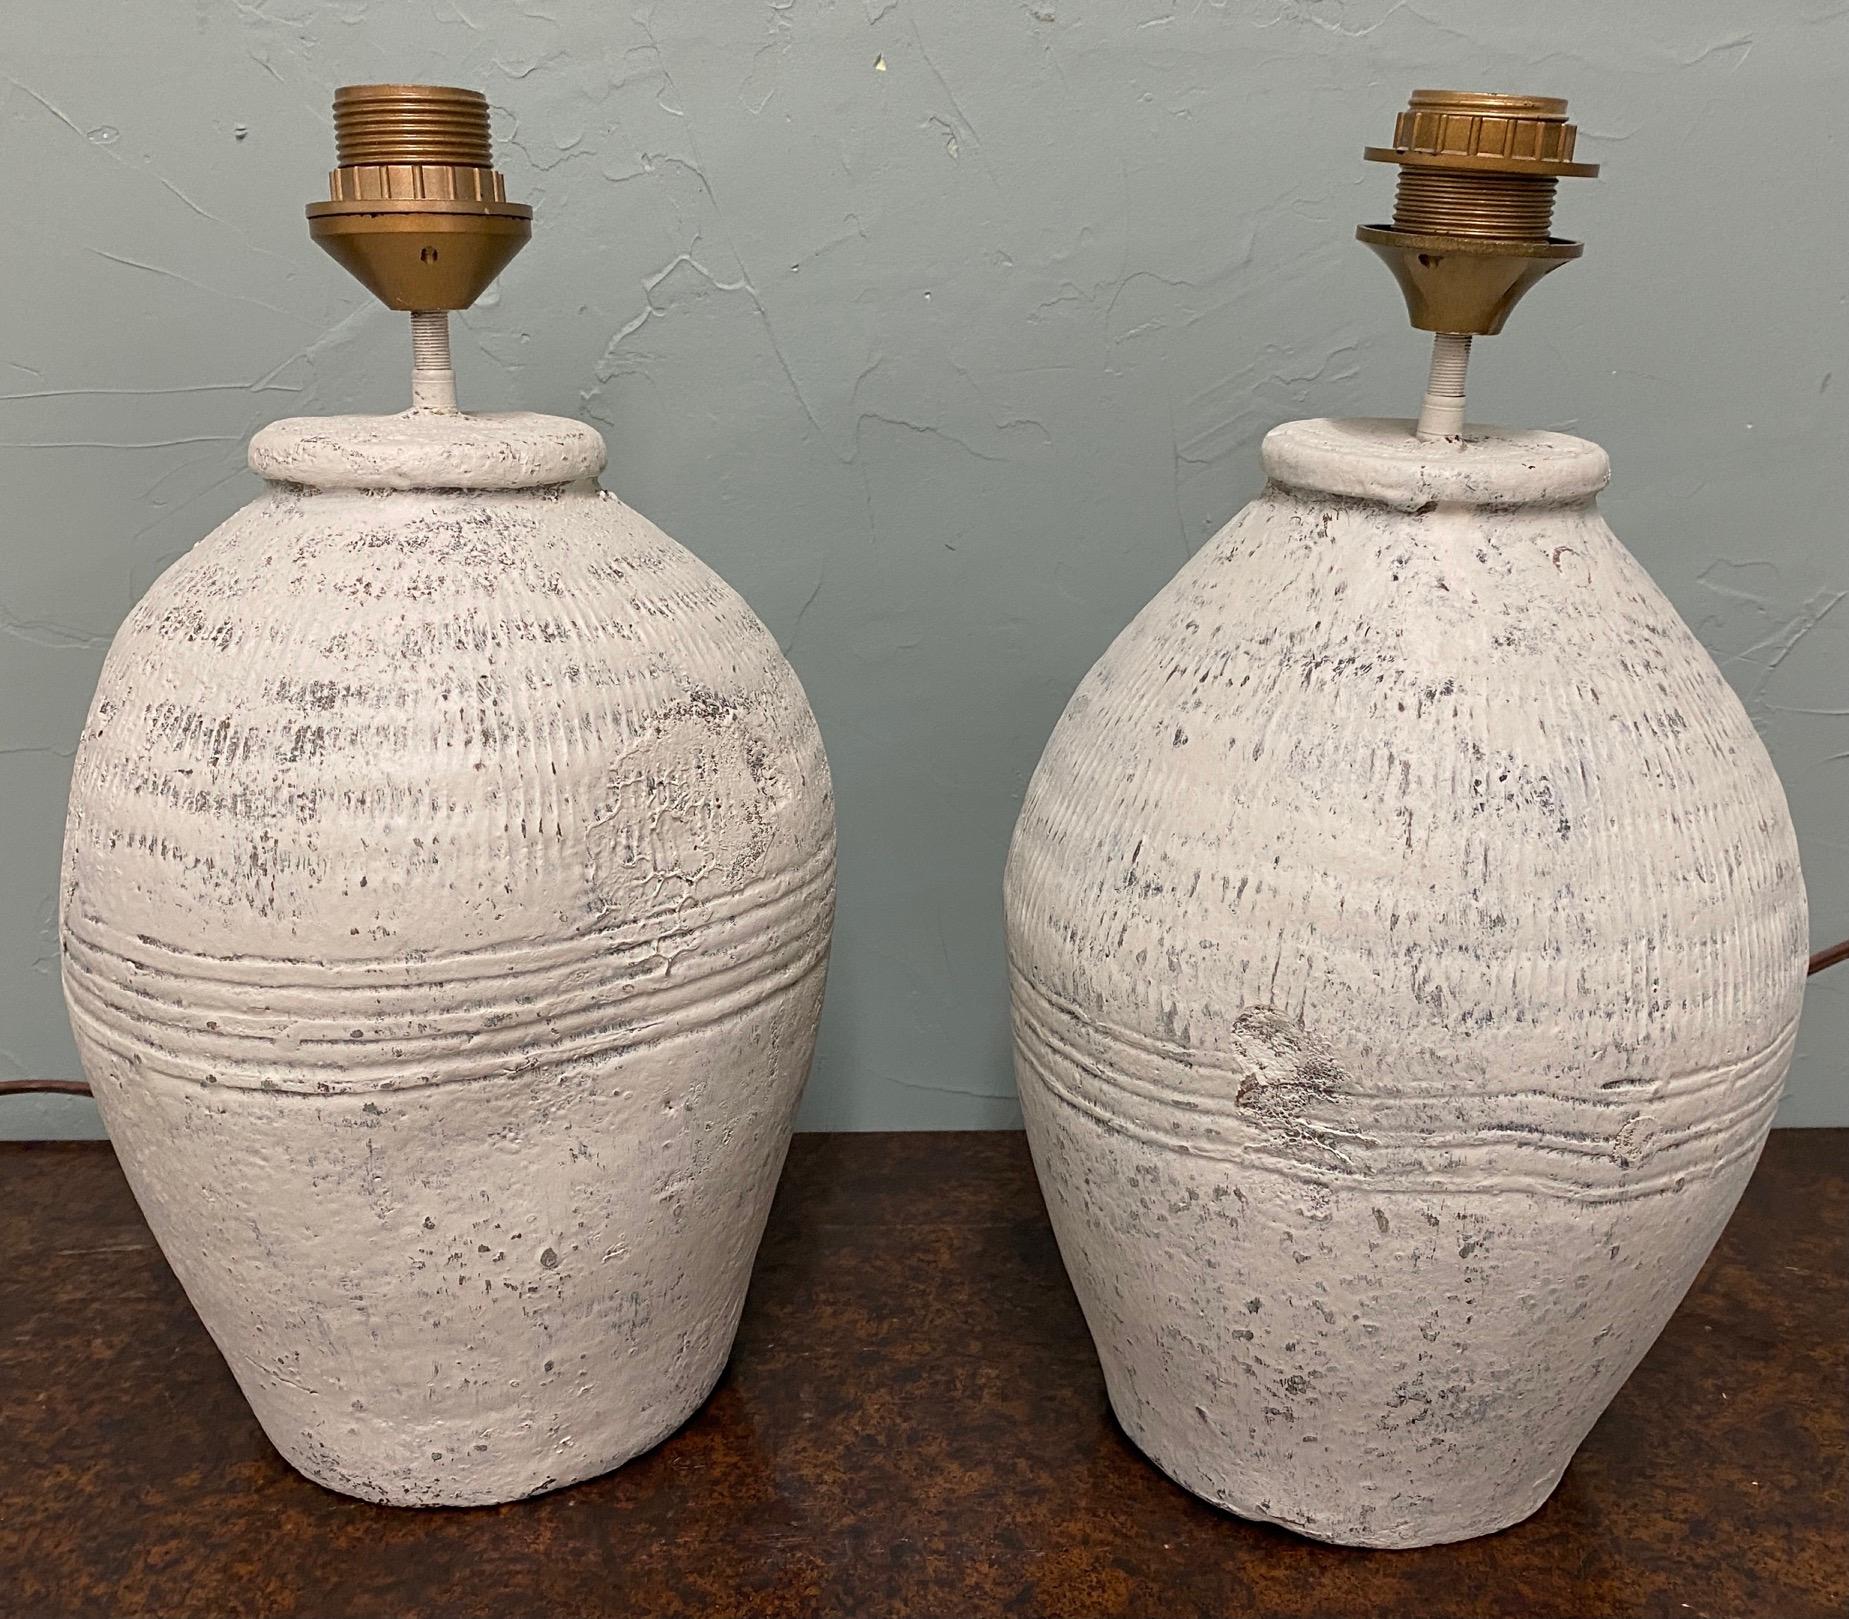 Pair of Rustic Chinese Terracotta Jar Lamps In Good Condition For Sale In Sheffield, MA